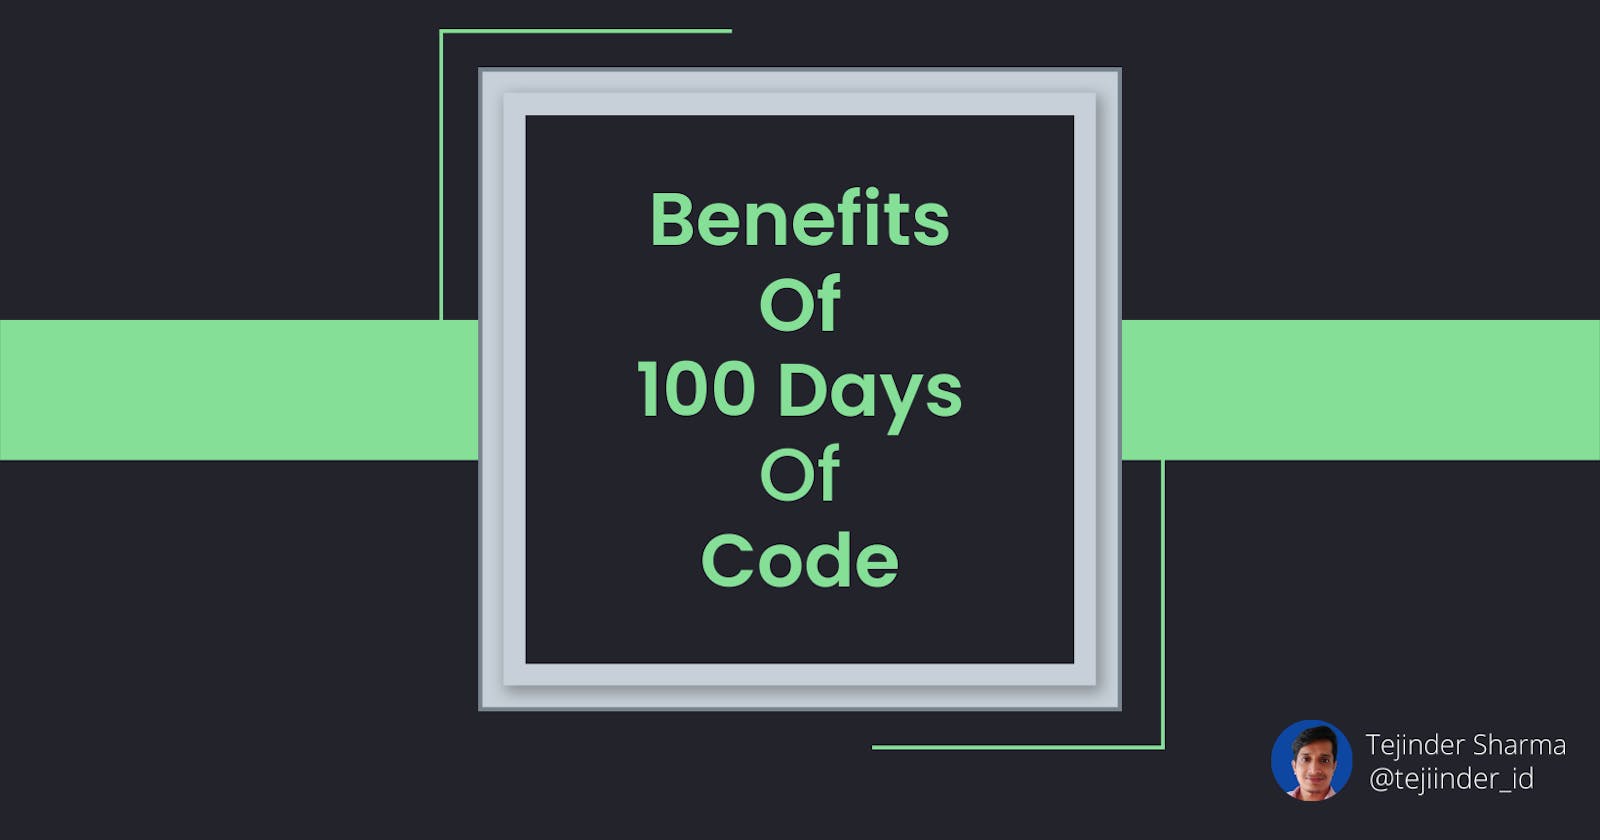 How to Improve Coding skills by doing 100 Days Of Code? Here are the 16 benefits that I got from it.